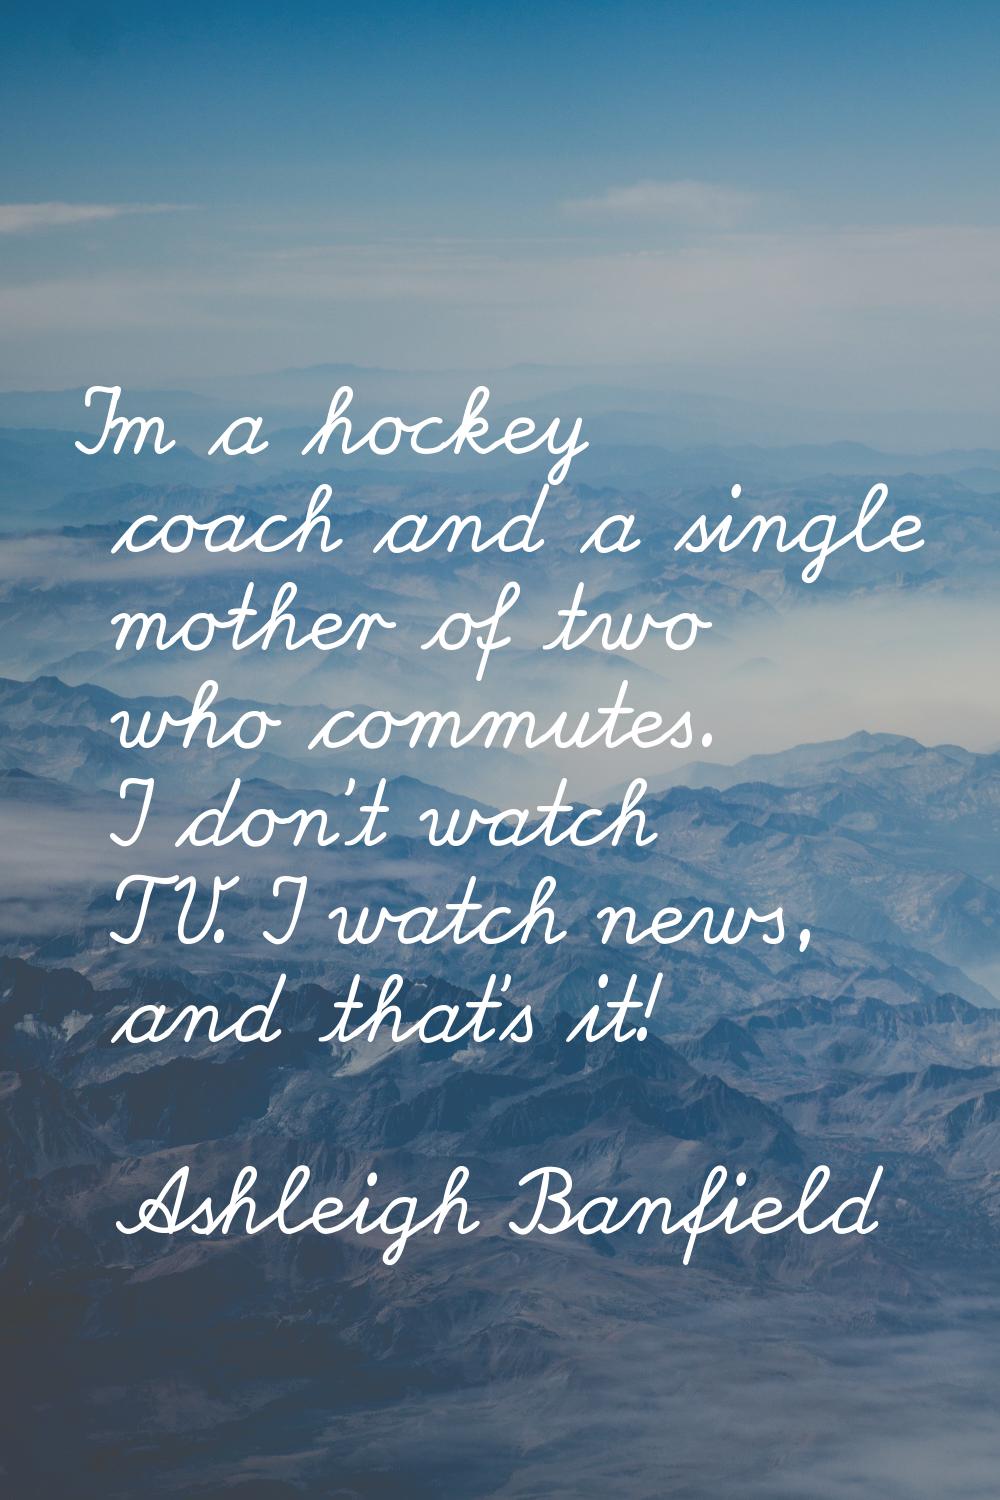 I'm a hockey coach and a single mother of two who commutes. I don't watch TV. I watch news, and tha